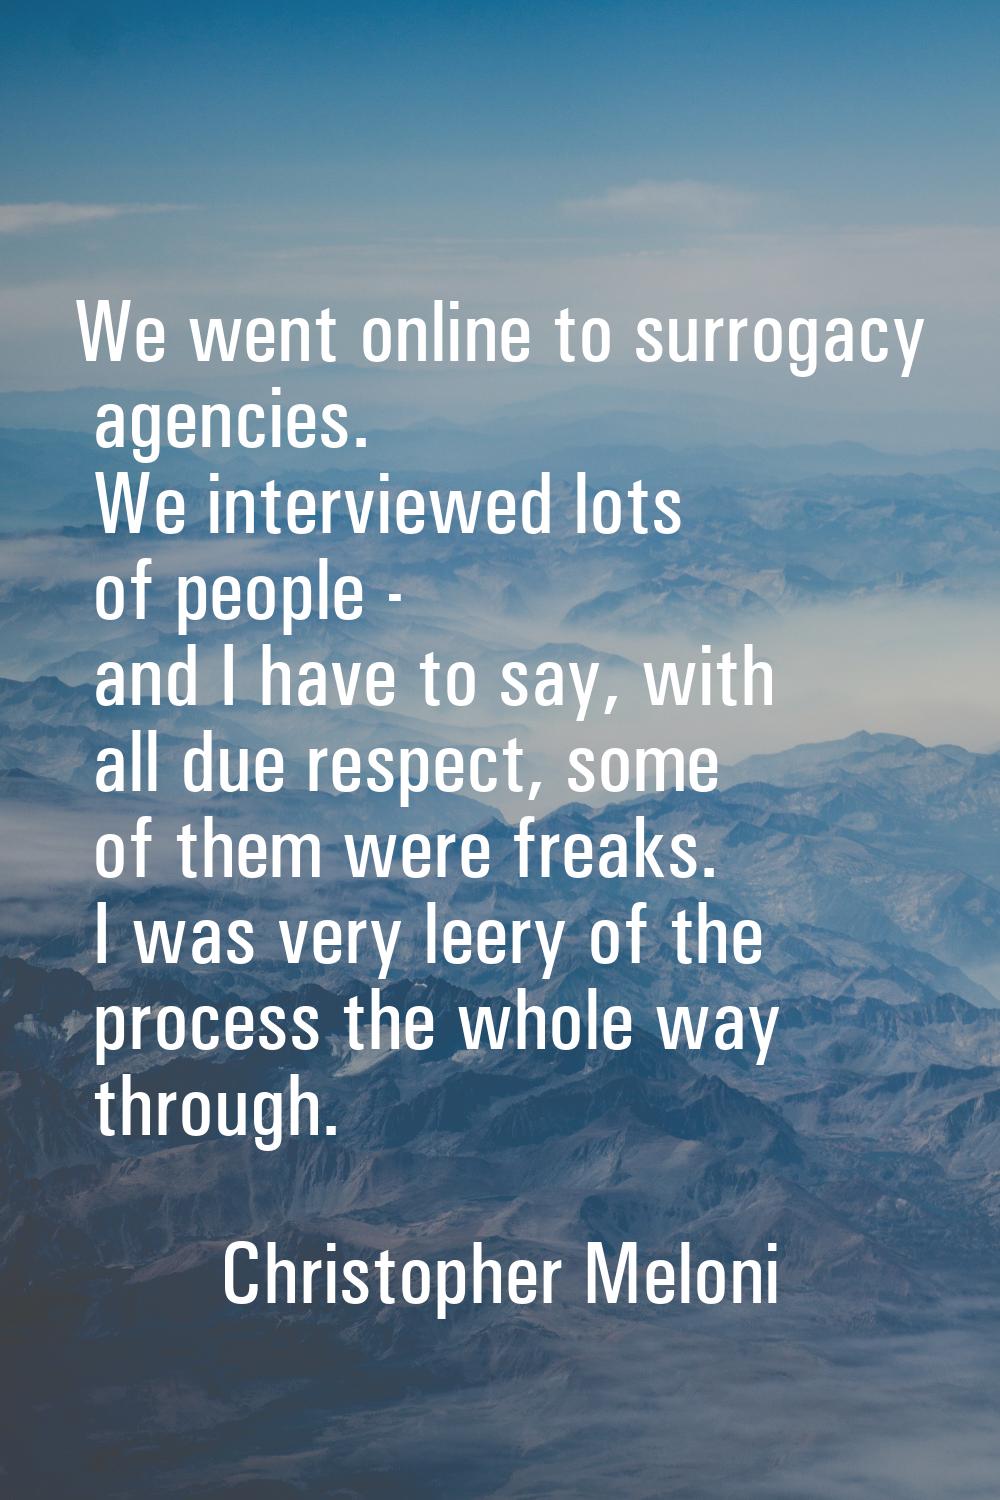 We went online to surrogacy agencies. We interviewed lots of people - and I have to say, with all d